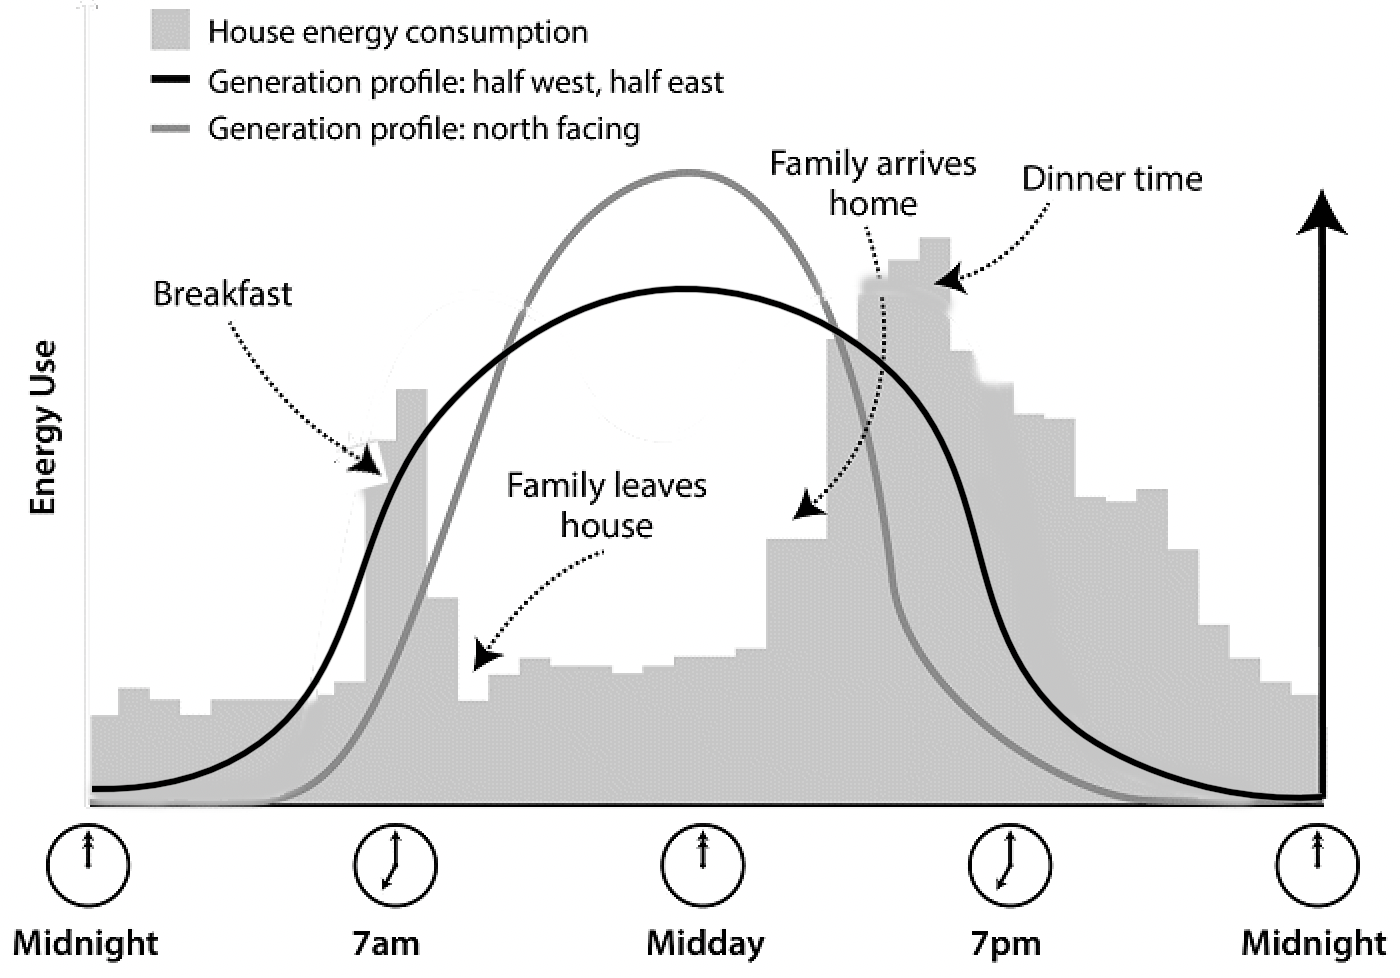 Electricity consumption profile of typical Australian home.